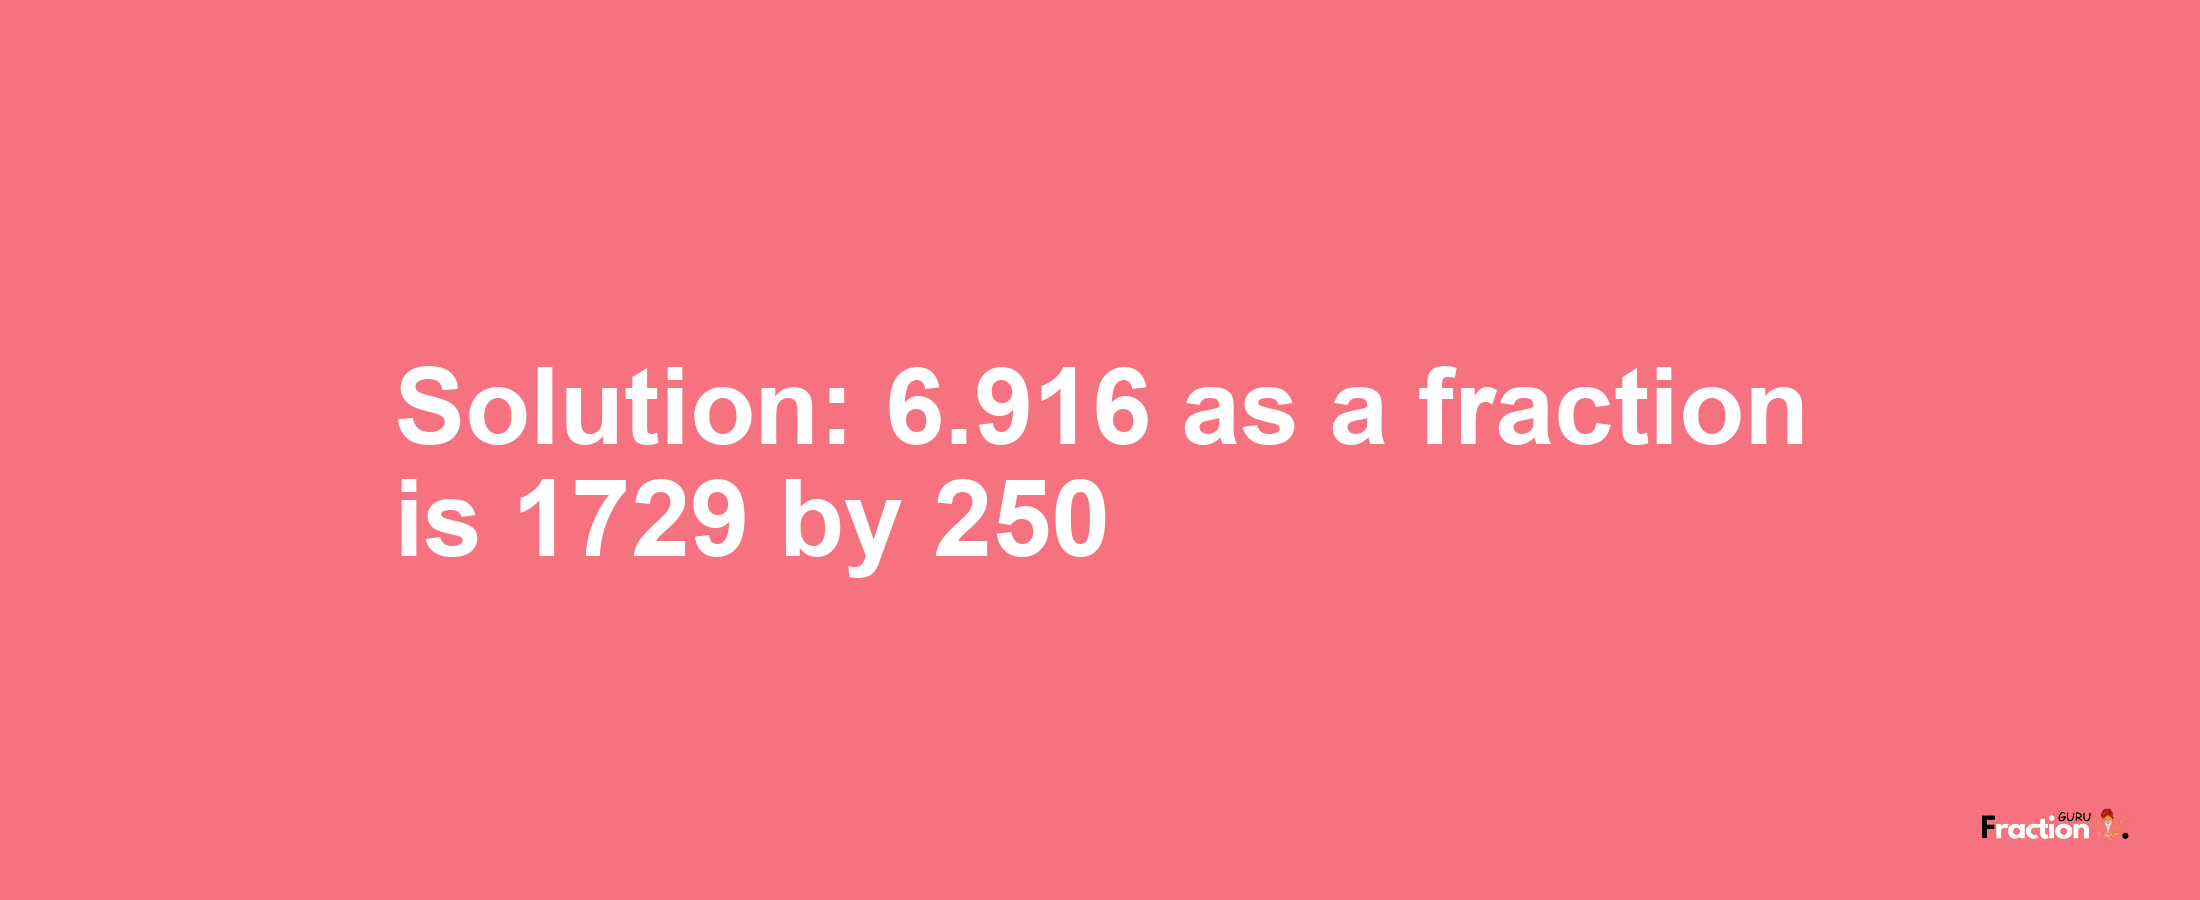 Solution:6.916 as a fraction is 1729/250